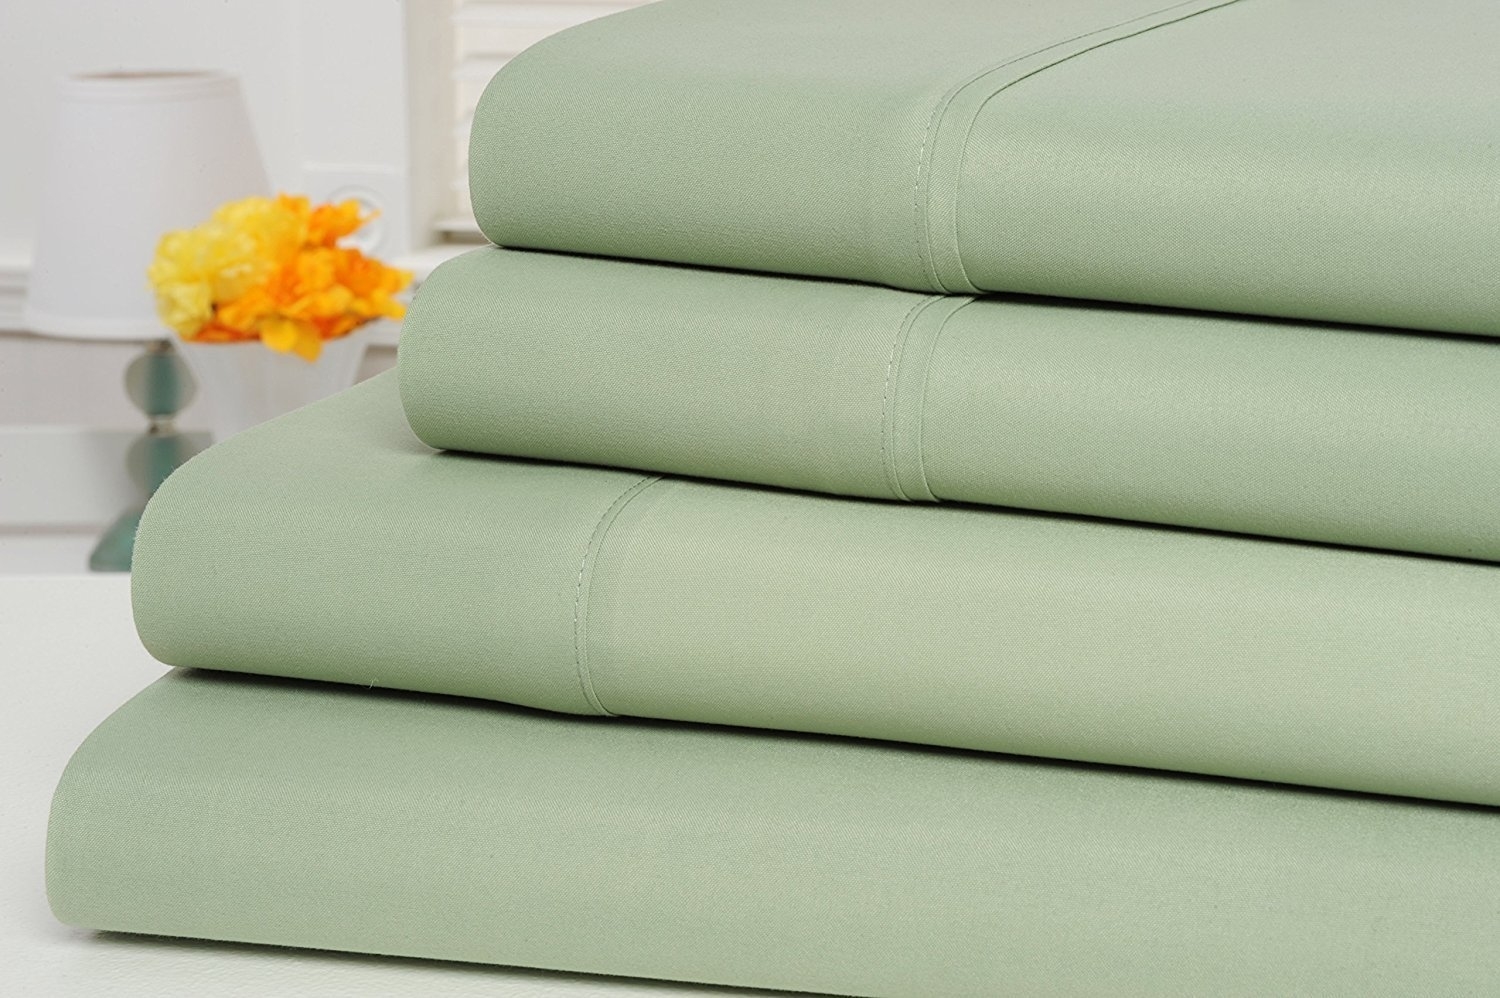 ! ! ! ! Cyber Week Sale ! ! ! ! ! ! ! ! Bogo ! ! ! ! Sleep peacefully in the high end luxurious feel of Bamboo Bed sheets. These sheets are durable and soft, sure to last. They fit perfectly on your mattress and come in 6 colors to accent your bedroom decor. These 1800 series bamboo comfort sheets are cozy, extremely soft and silky which ensures you get peaceful sleep during the night. These bamboo sheets are made of an organic bamboo fiber blend with microfiber, offering unparalleled hypoallergenic. Order your Bamboo sheets today to get in on the latest bedding trend